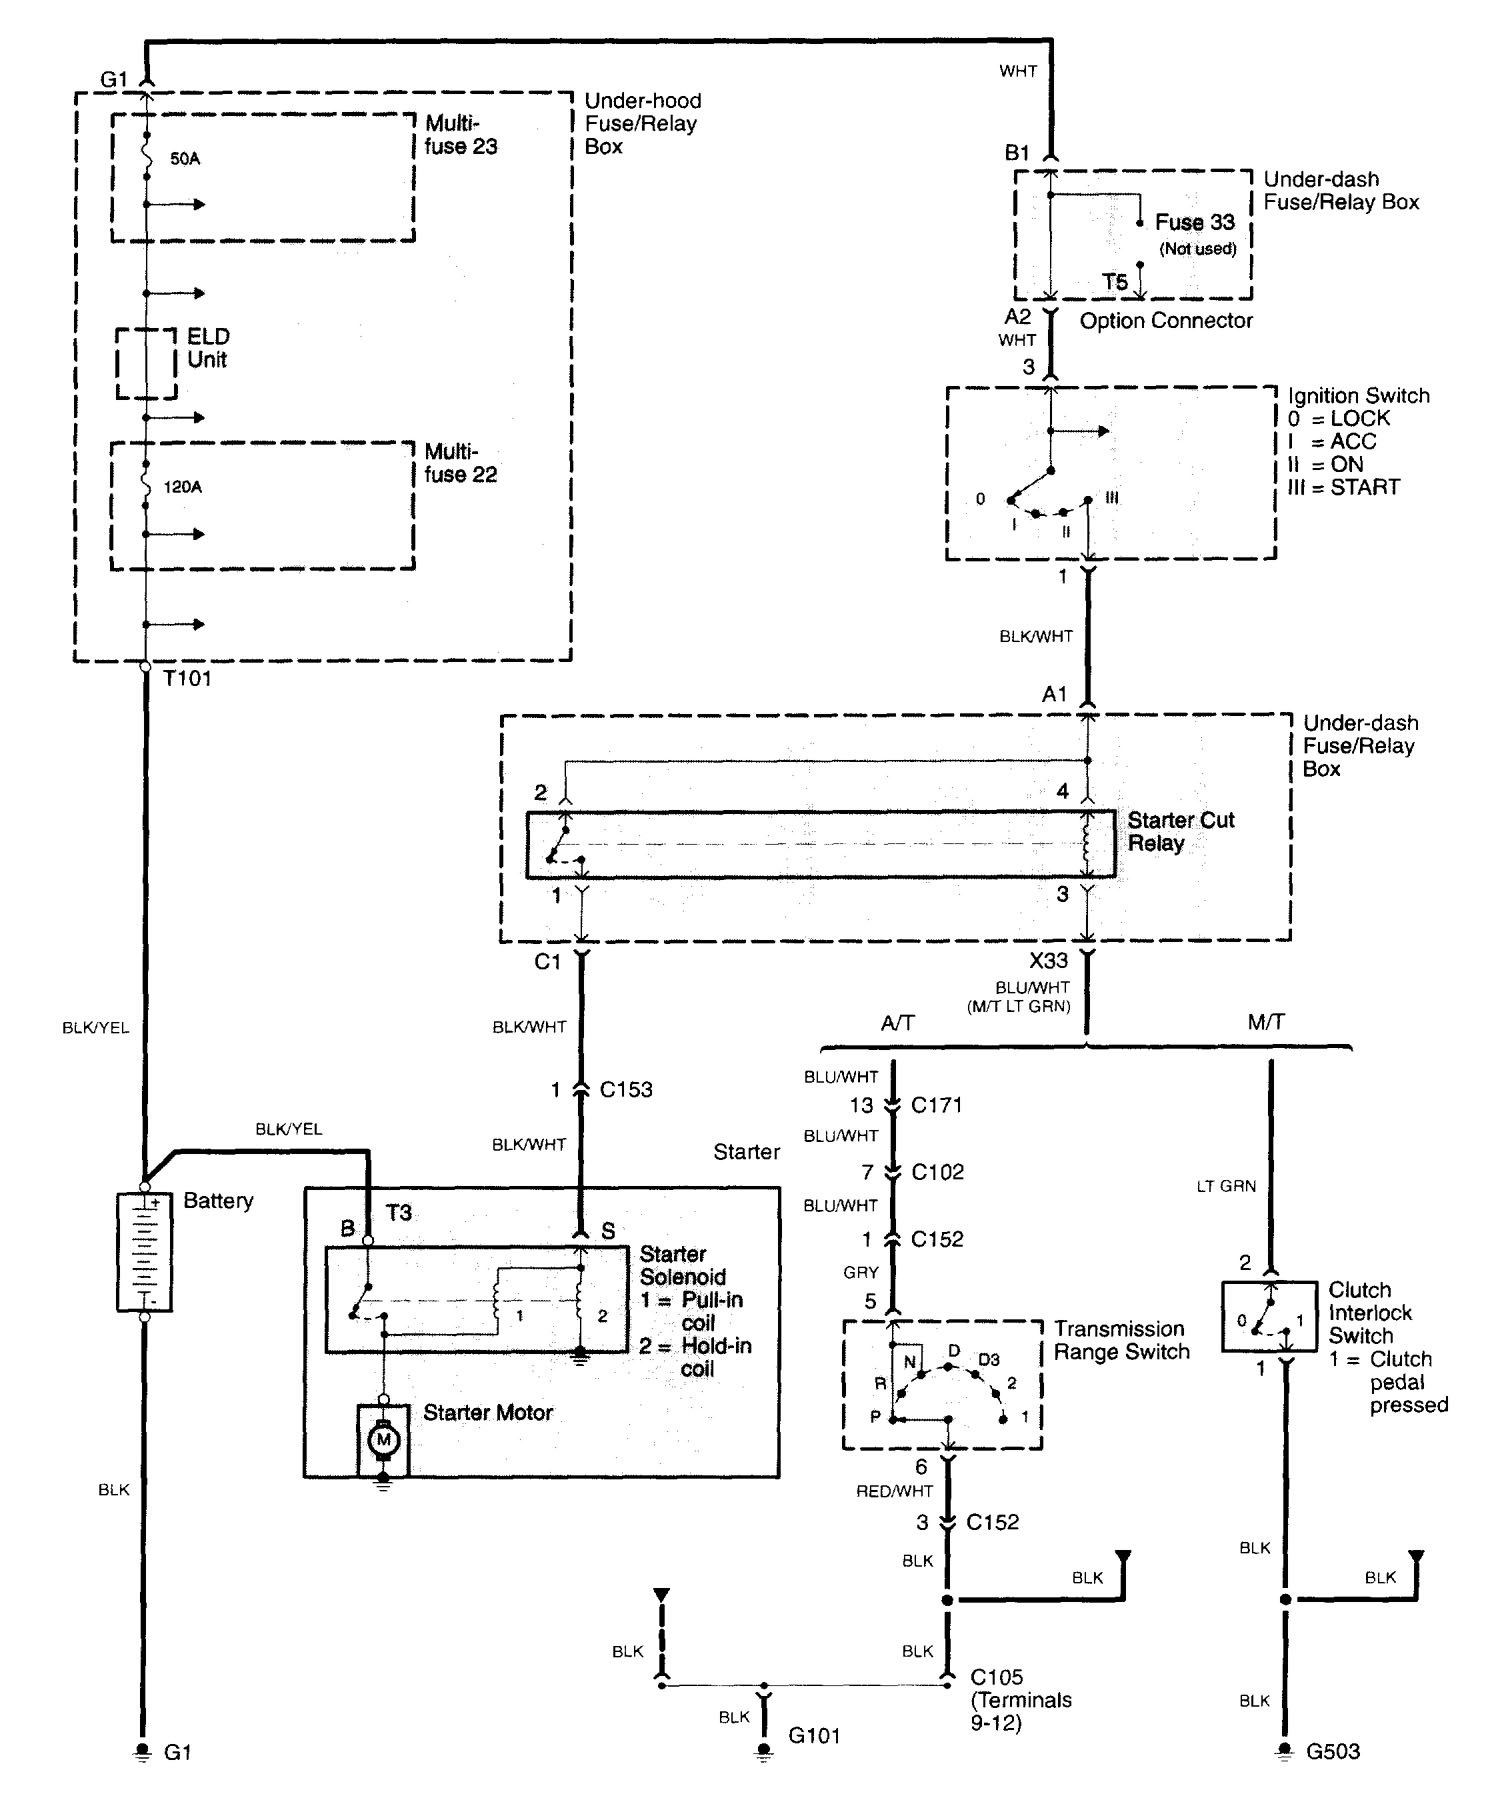 2002 Cadillac Deville Factory Amp Wiring Diagram from www.carknowledge.info